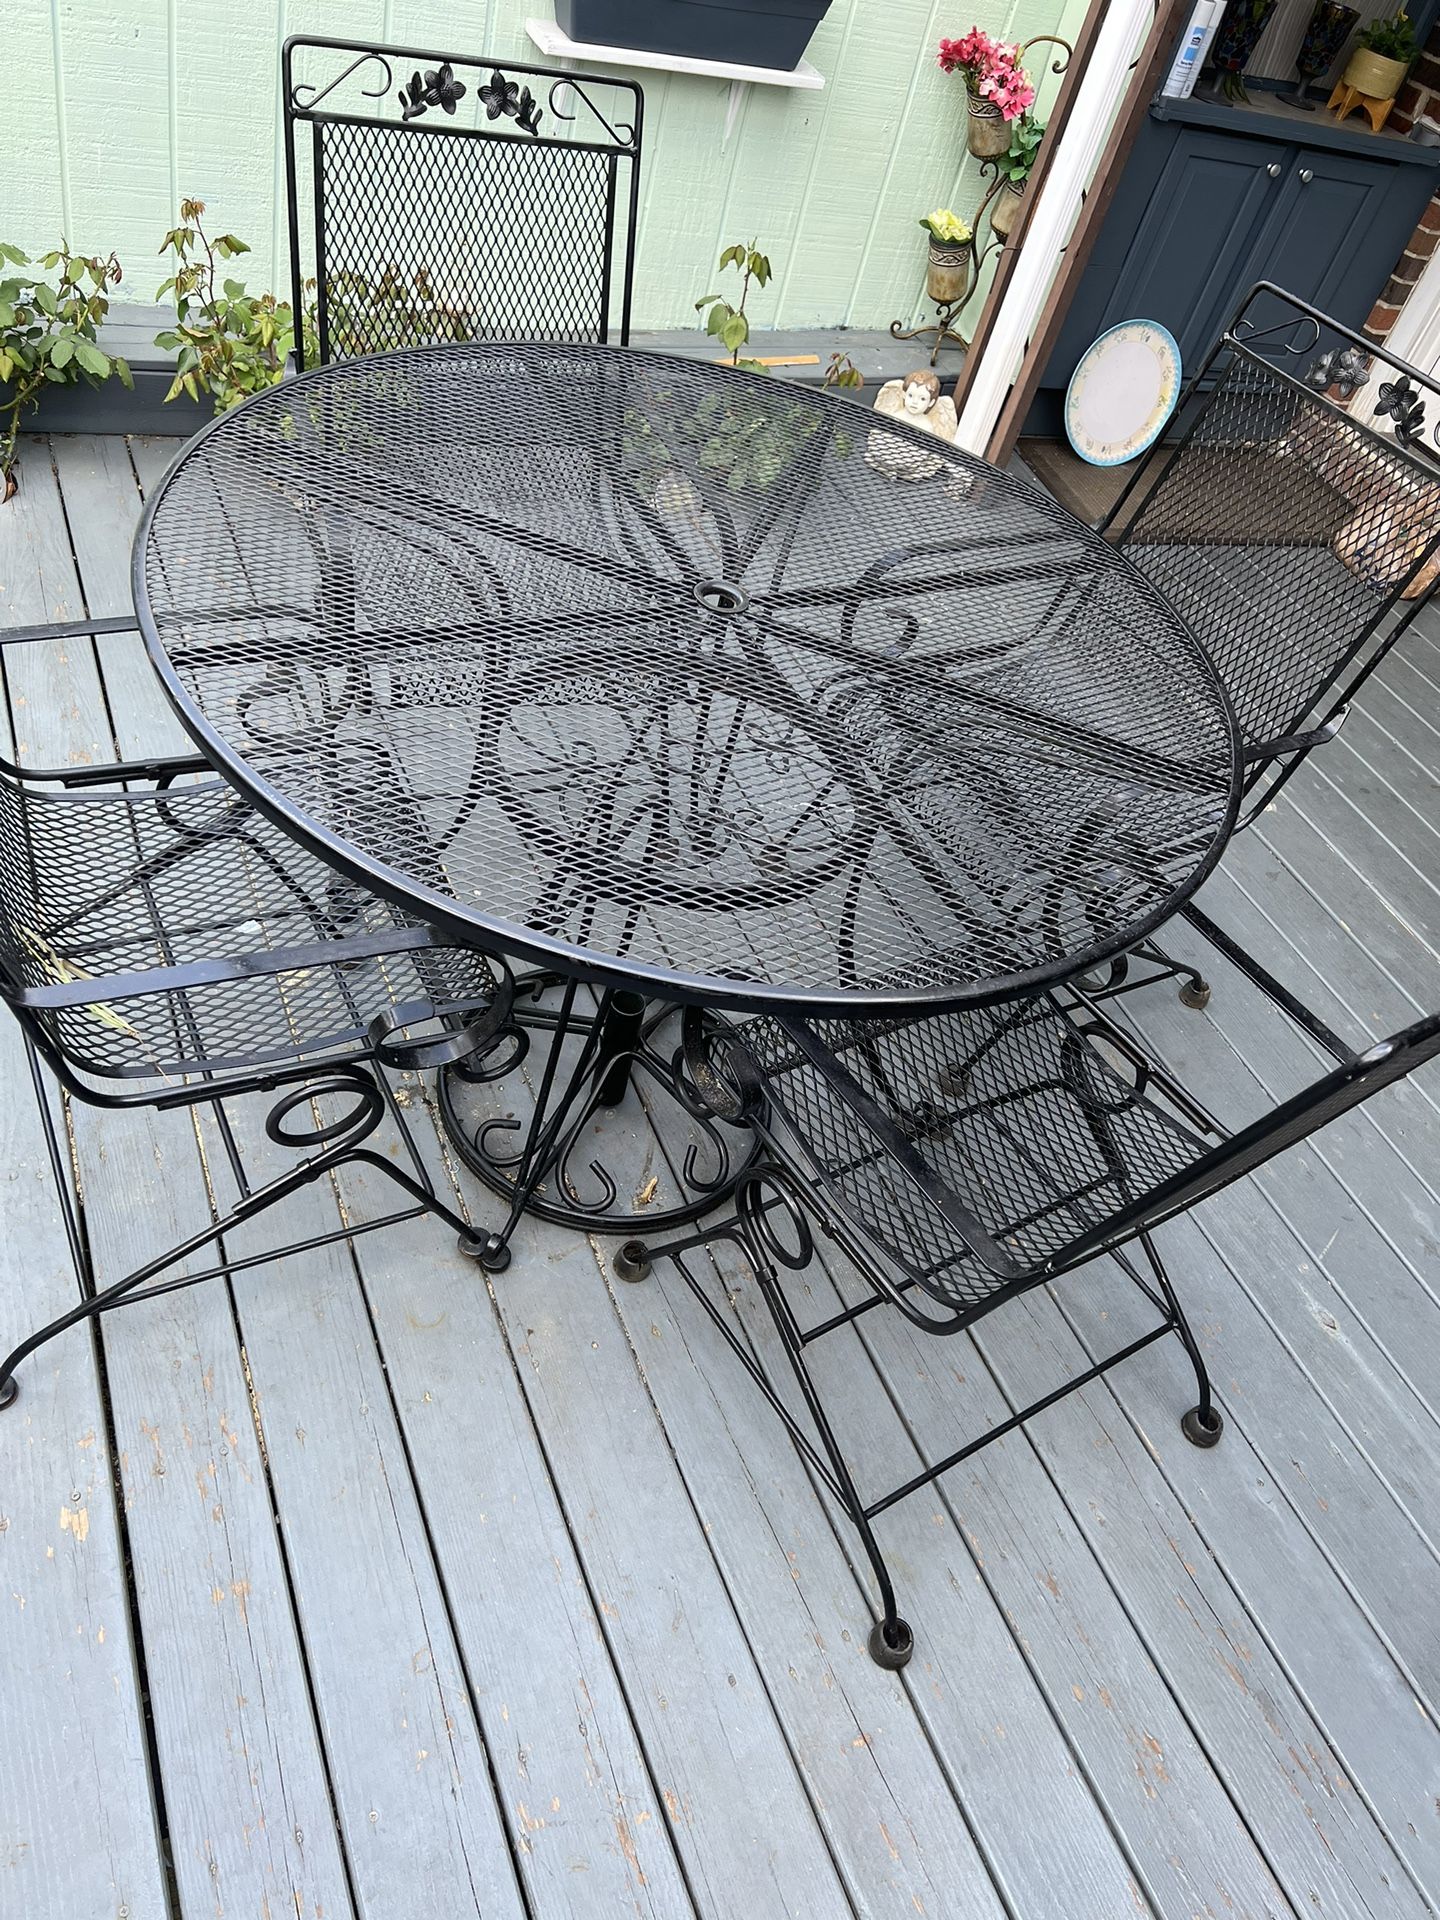 Outdoor Table And Four Chairs